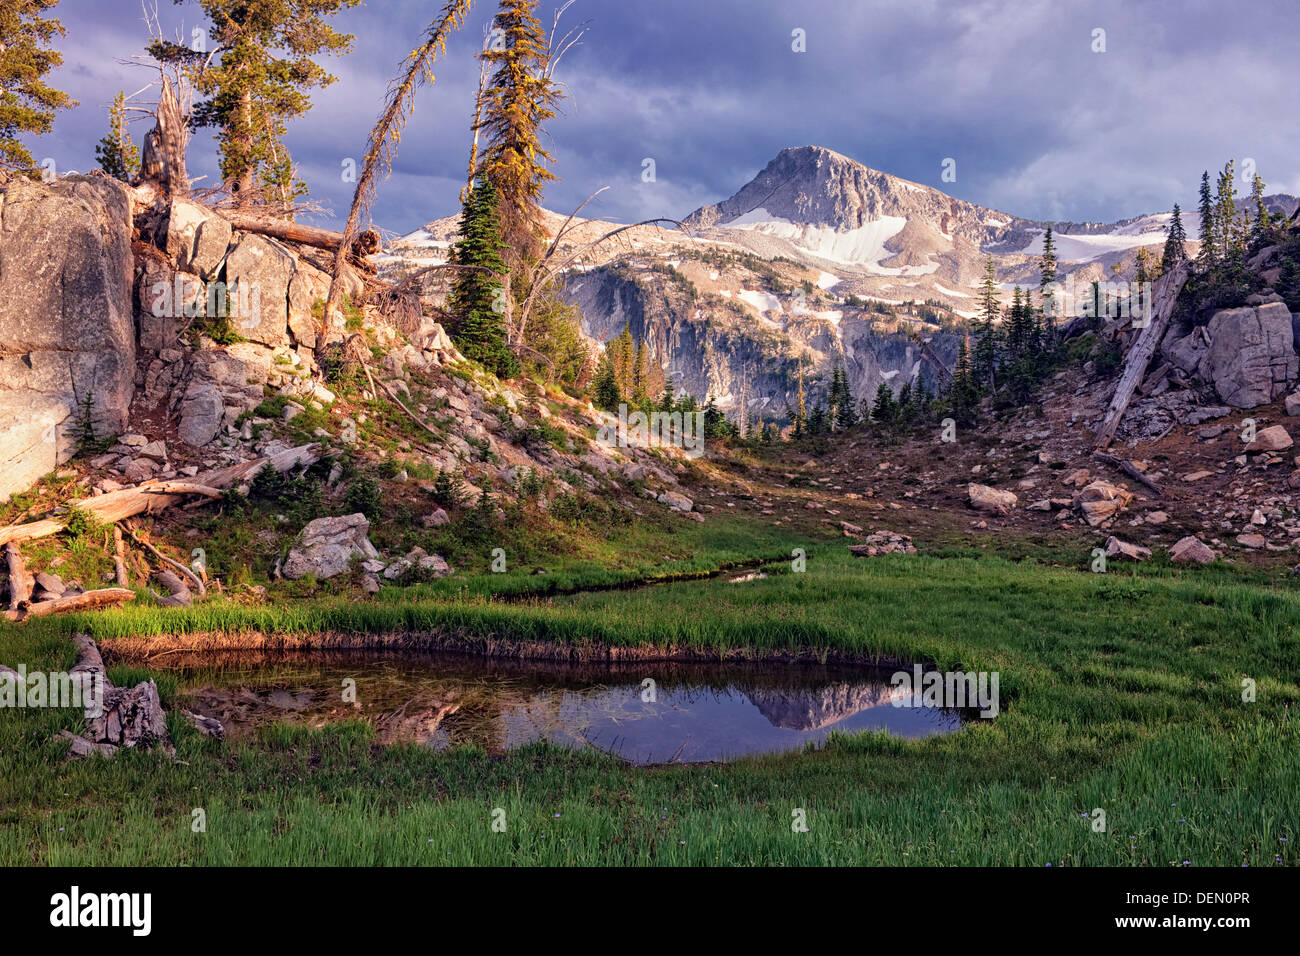 Evening storm approaches tarn reflection of Eagle Cap in the Lakes Basin of NE Oregon's Eagle Cap Wilderness. Stock Photo